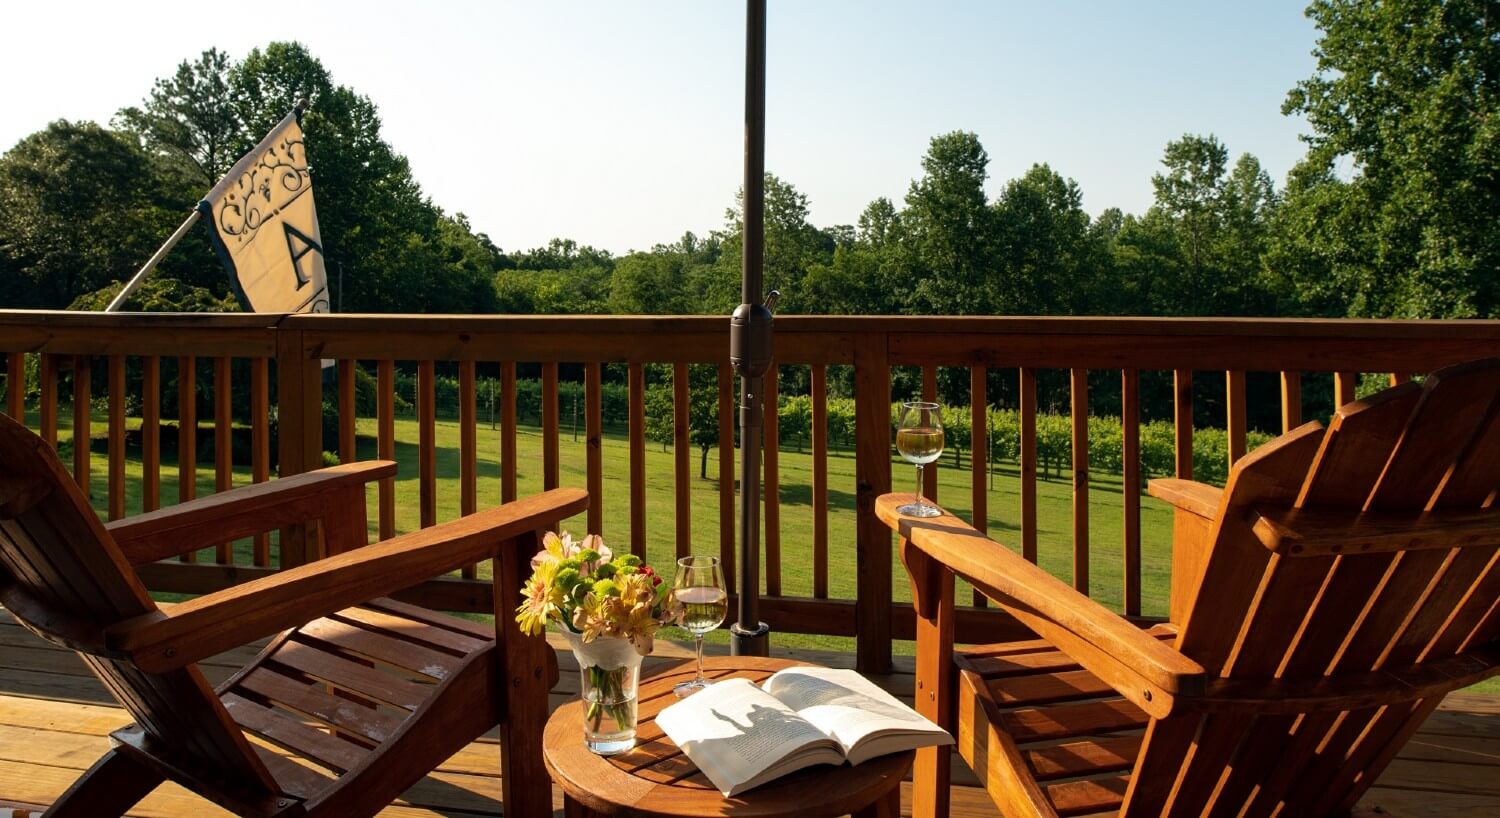 Outdoor deck with two adirondack chairs, table with book and wine glass overlooking a lawn and trees